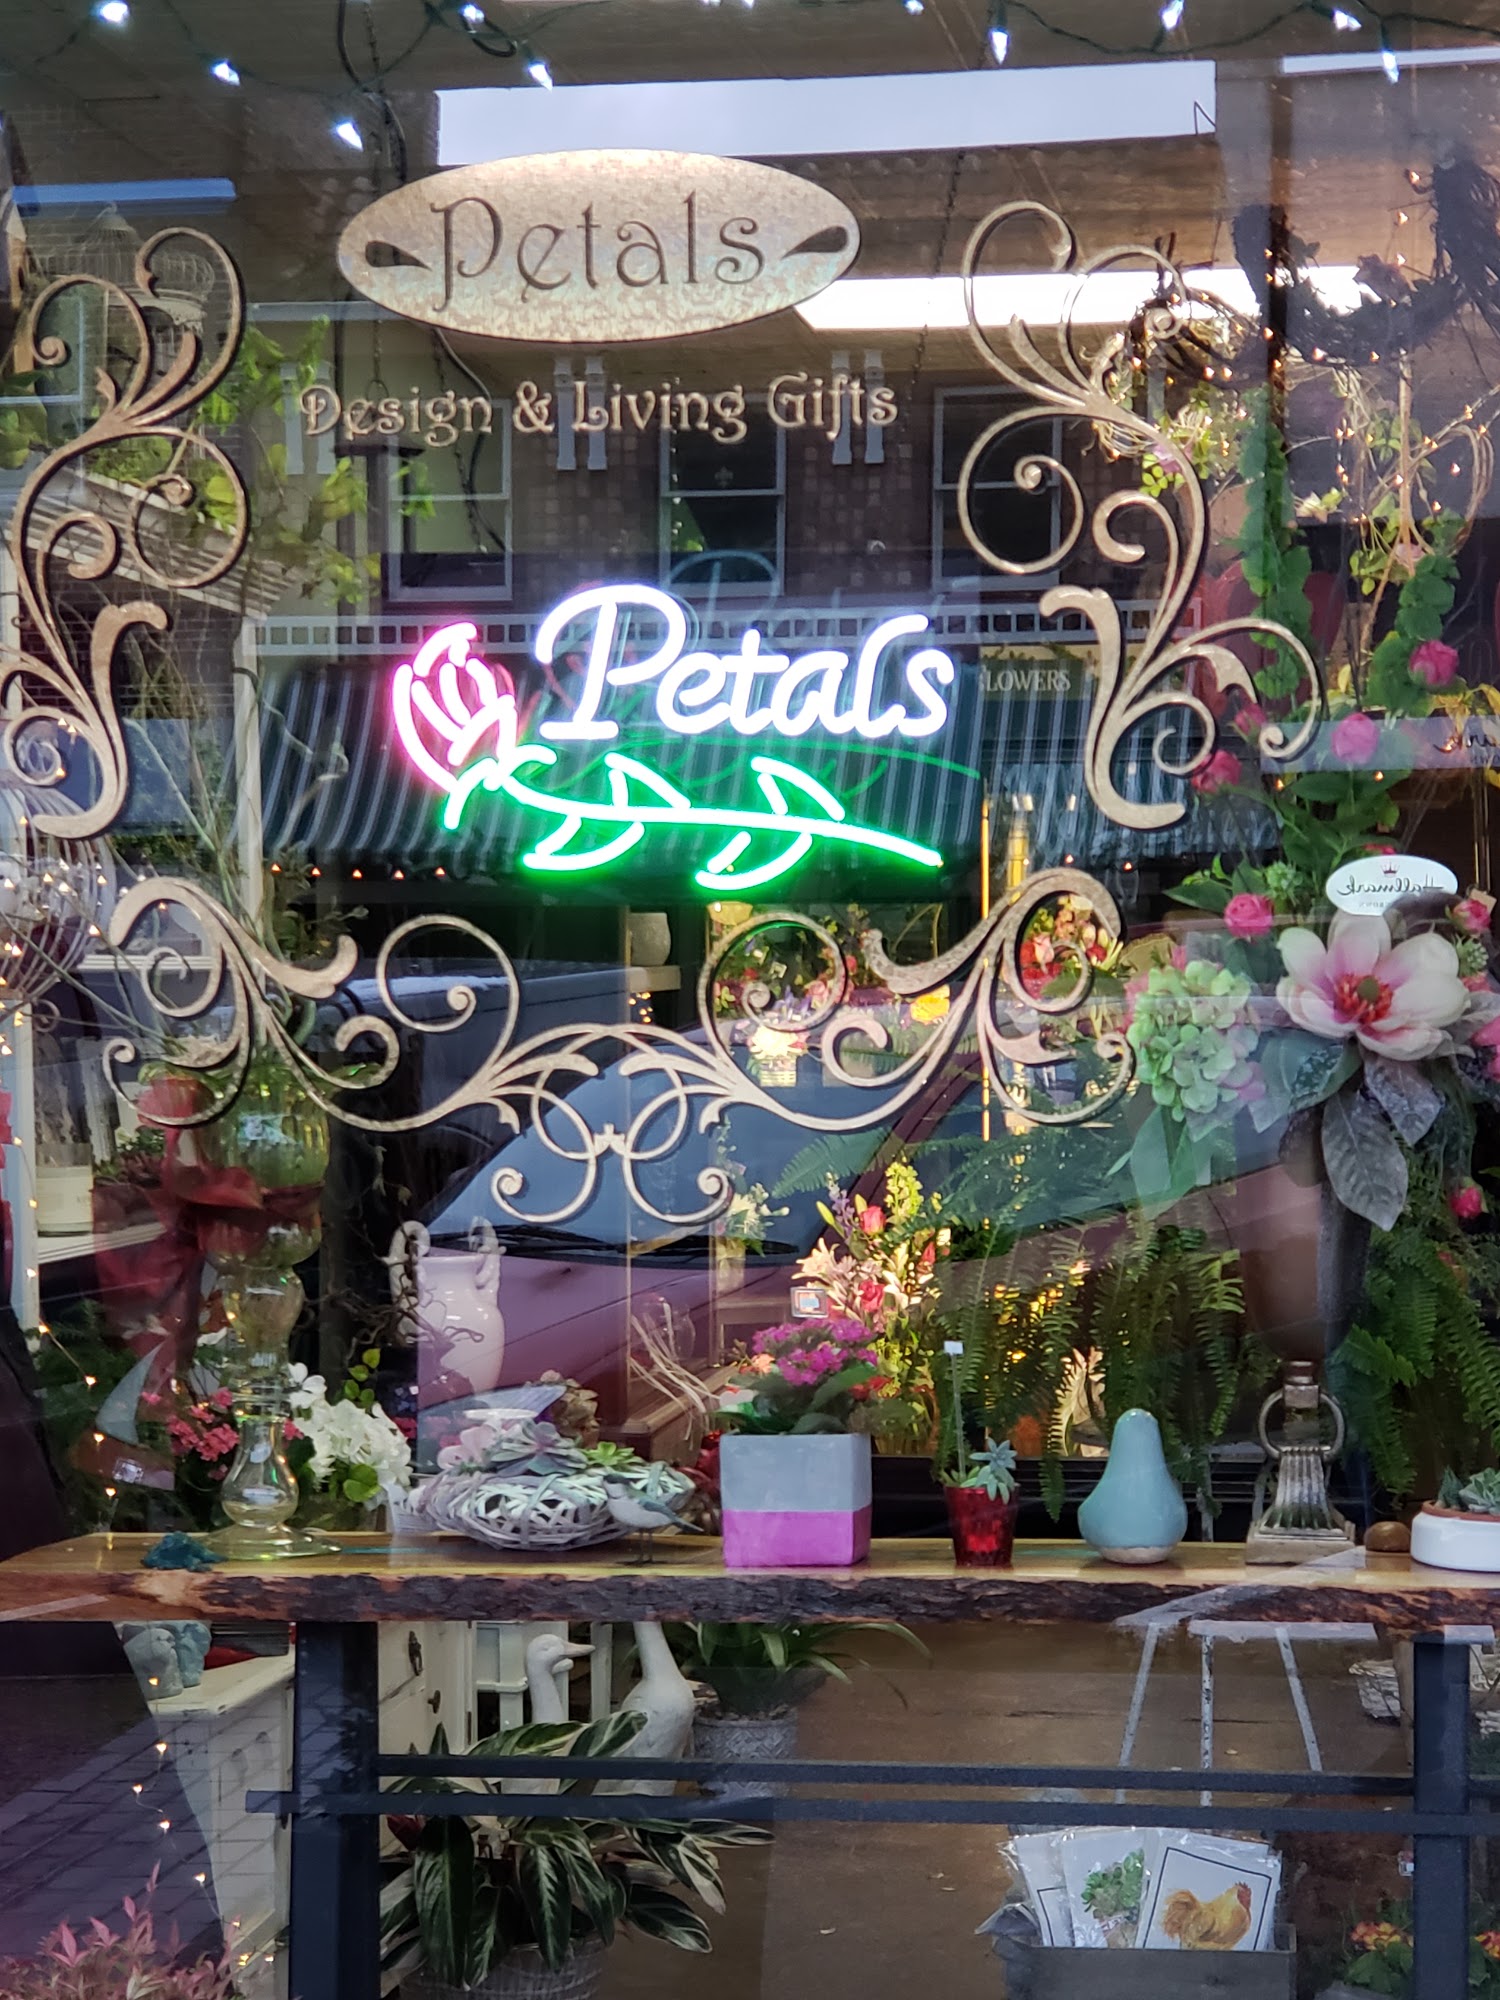 Petals Design and Living Gifts